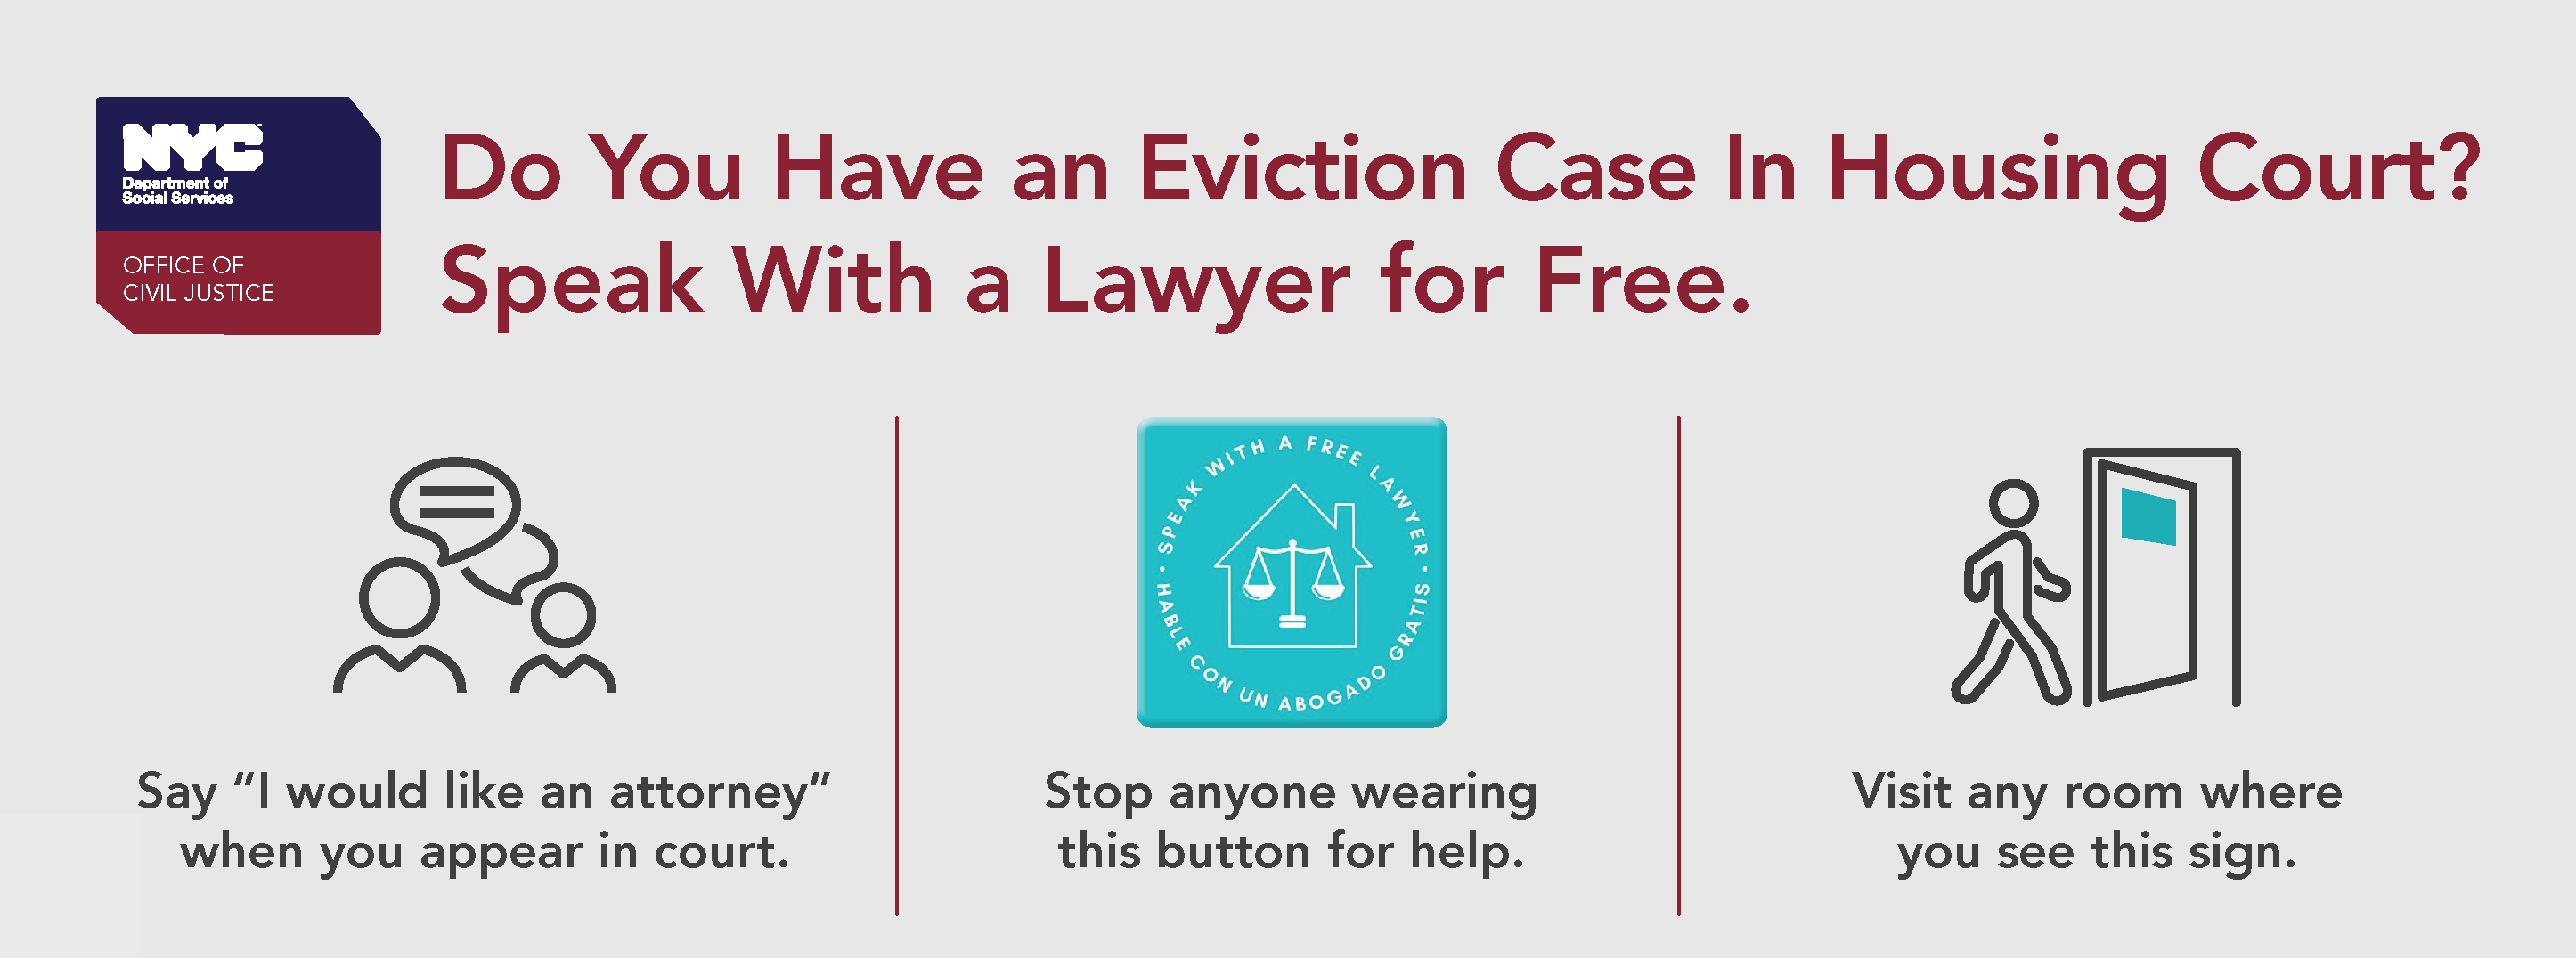 A graphic demonstration of how to get free legal help: ask for it in court, talk to someone wearing the teal logo, or go to any room on site with the teal logo on it'